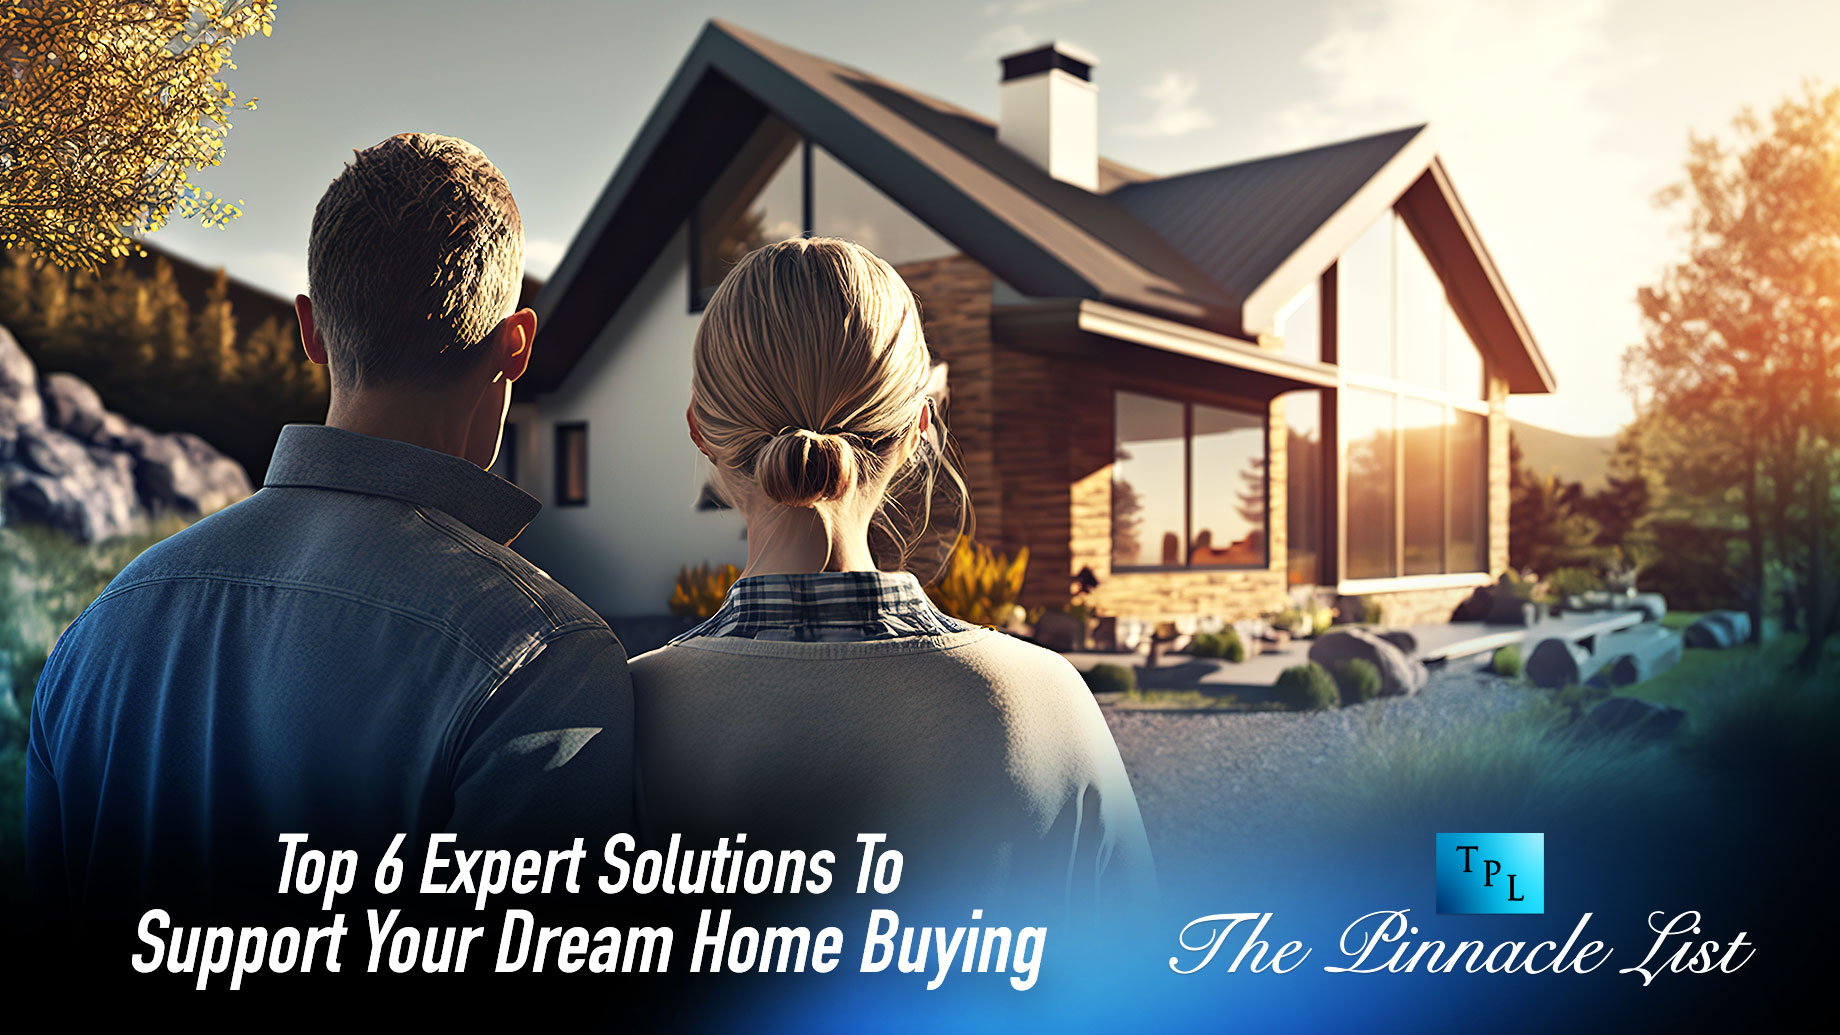 Top 6 Expert Solutions To Support Your Dream Home Buying